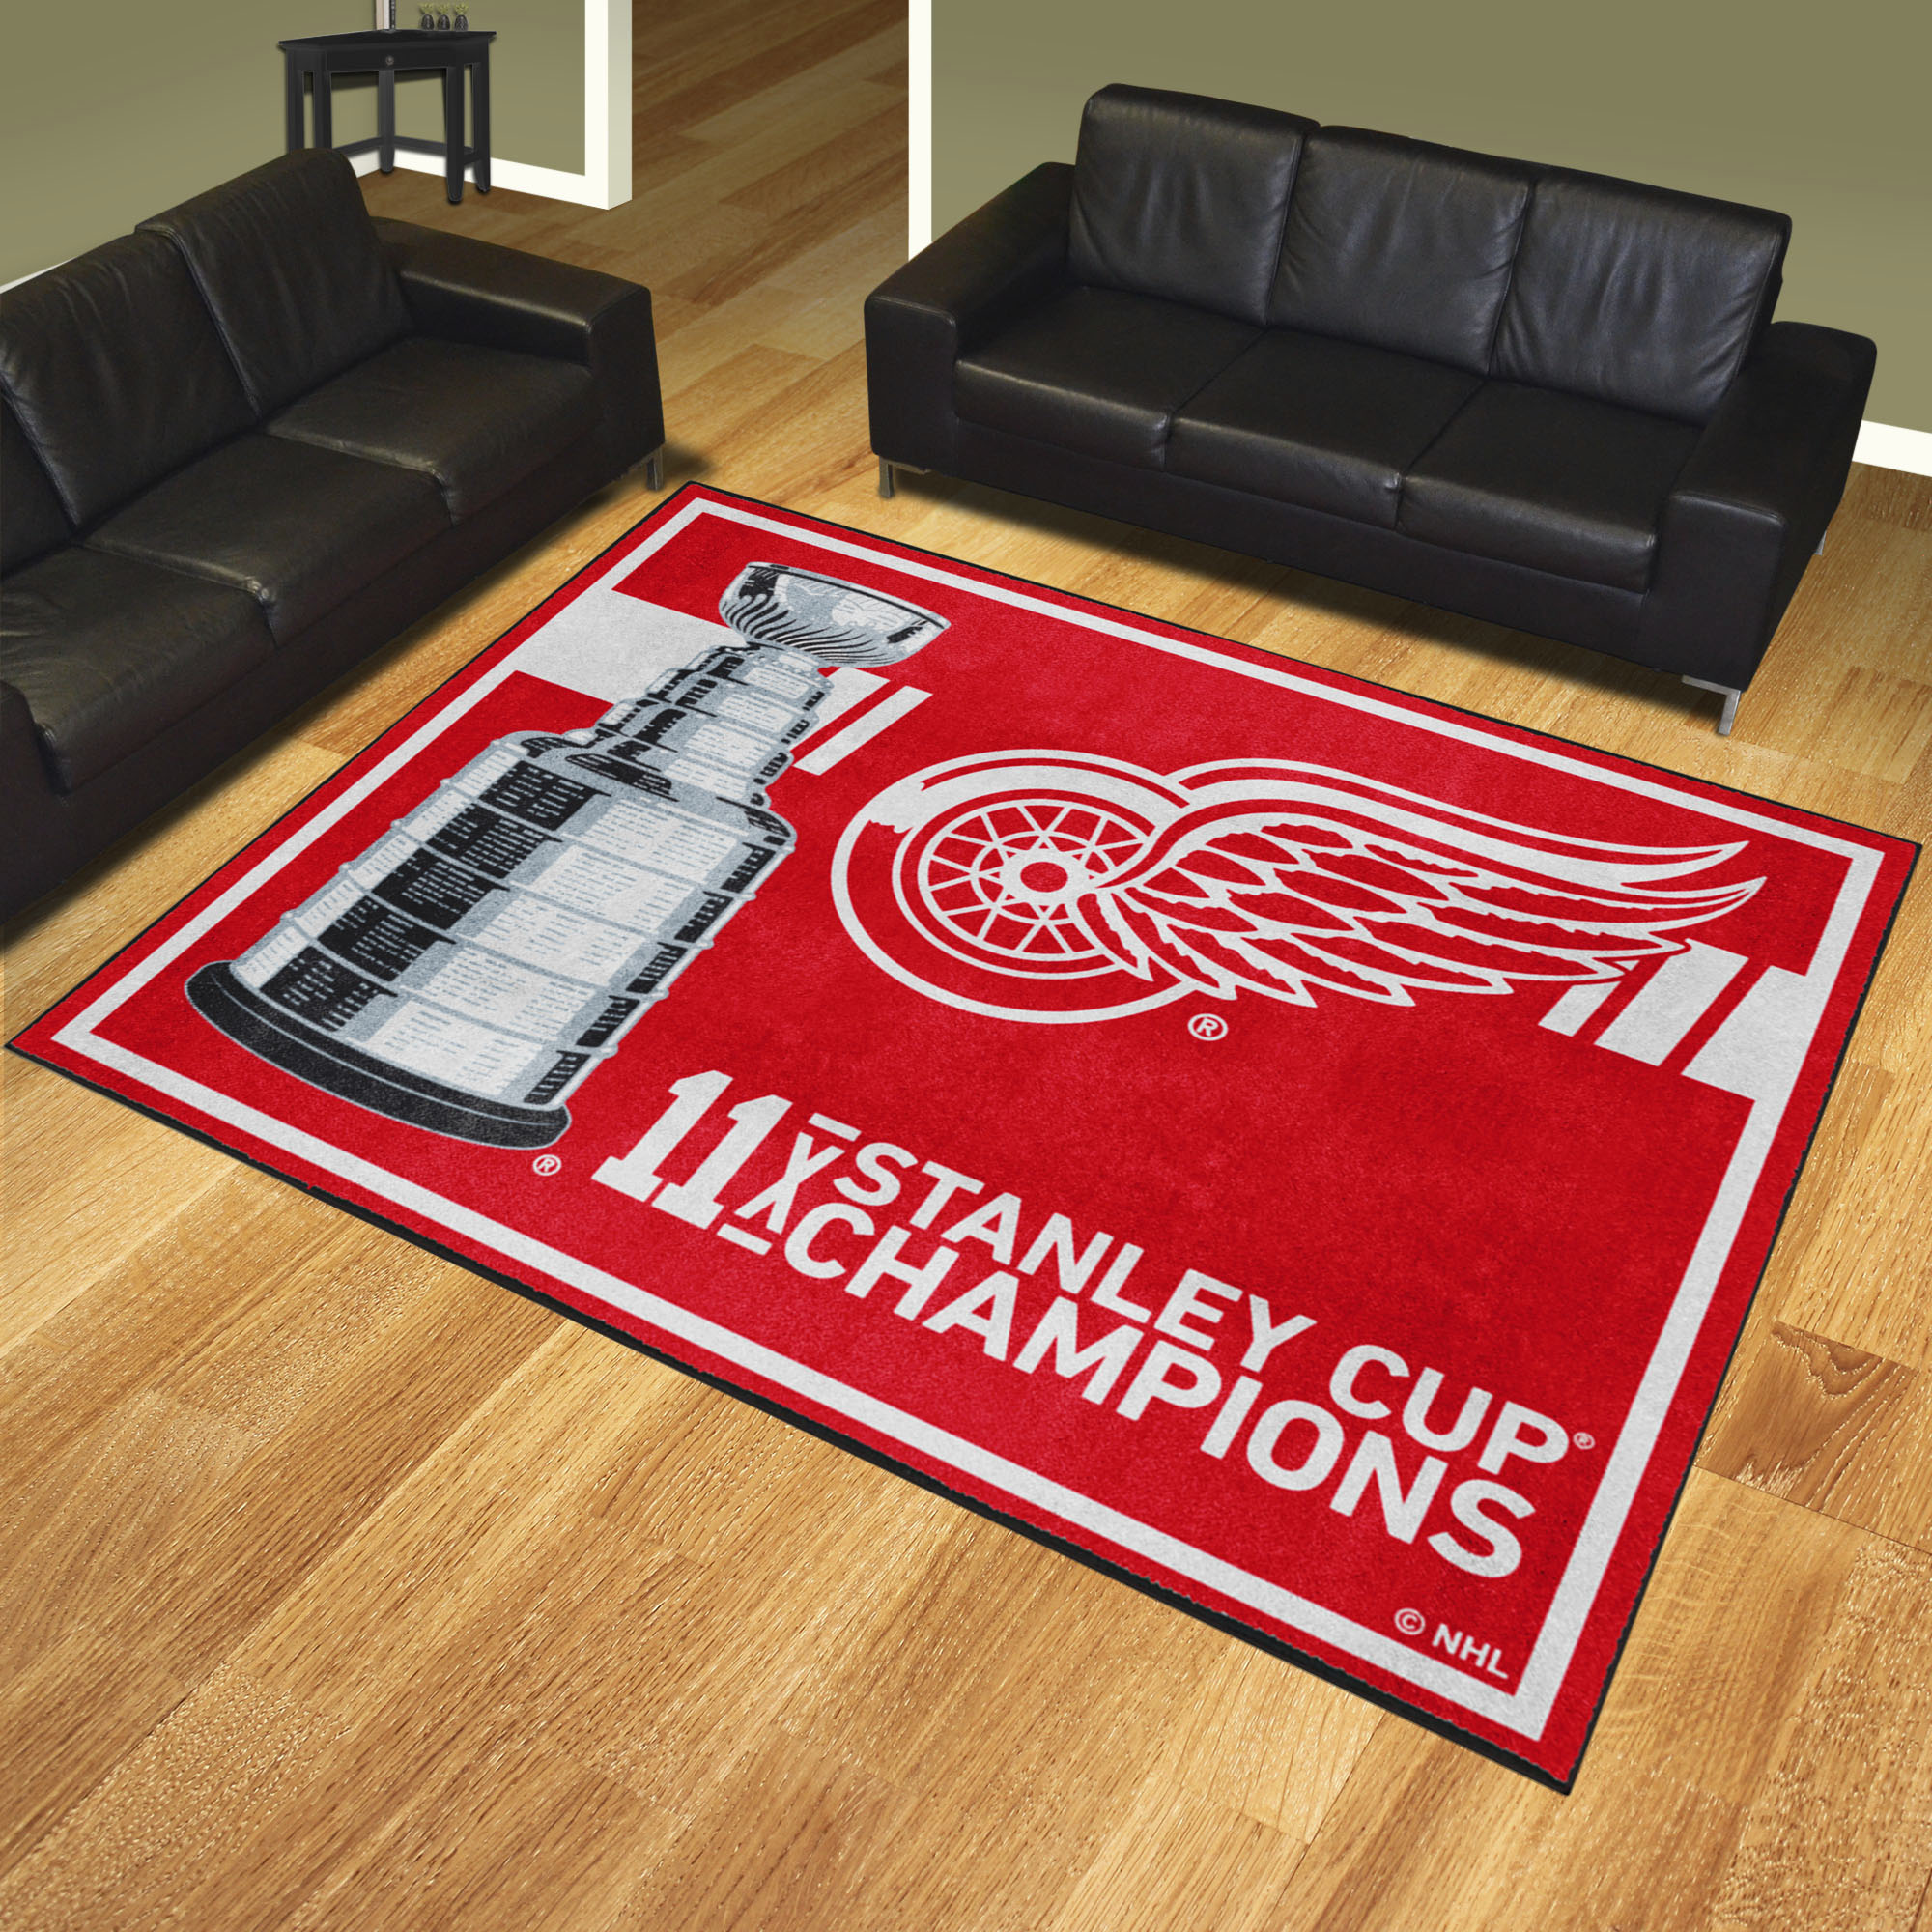 Detroit Red Wings Area Rug - 8' x 10' Nylon